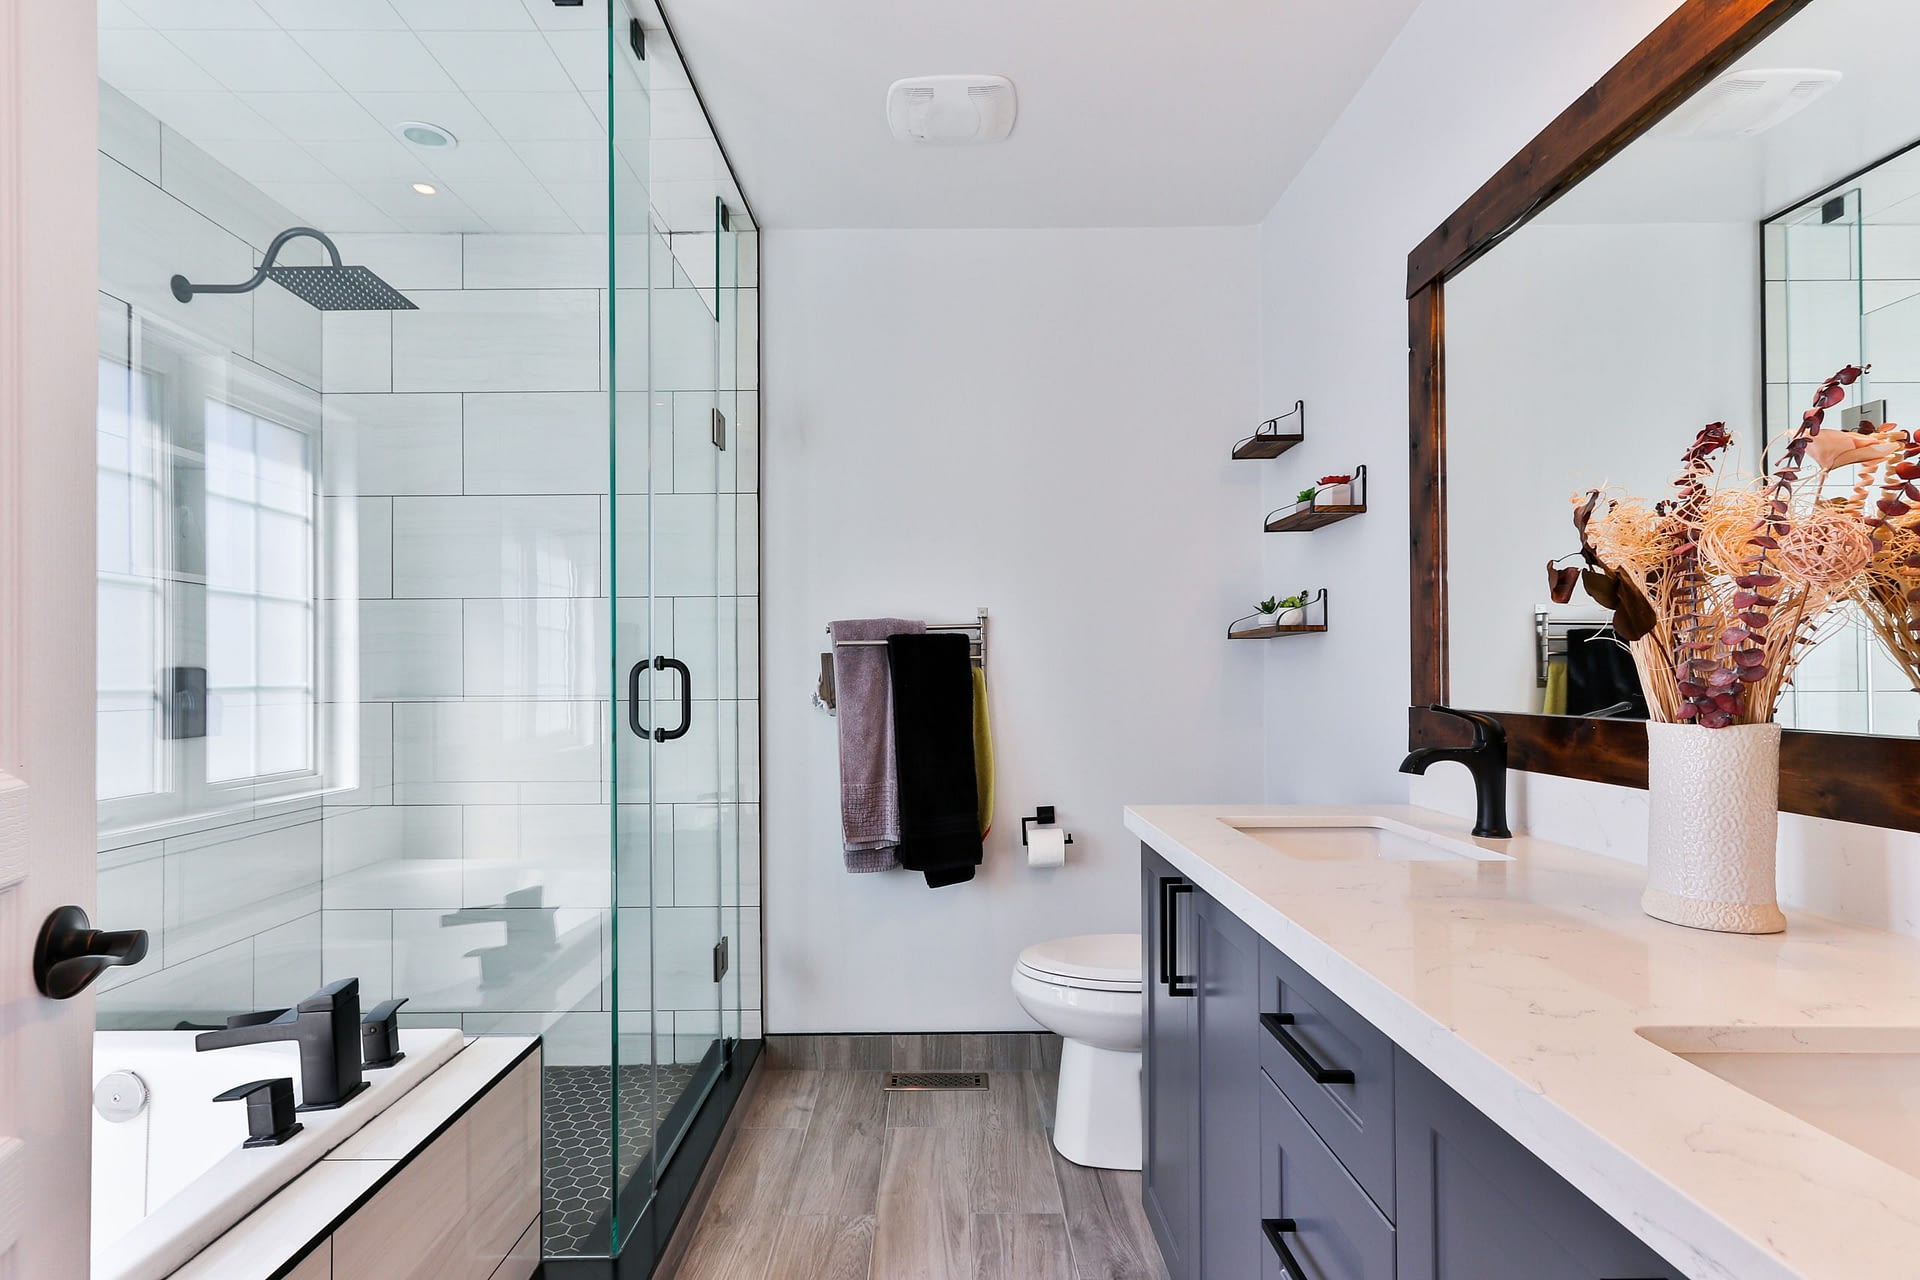 Best Bathroom Walls: Everything You Need to Know